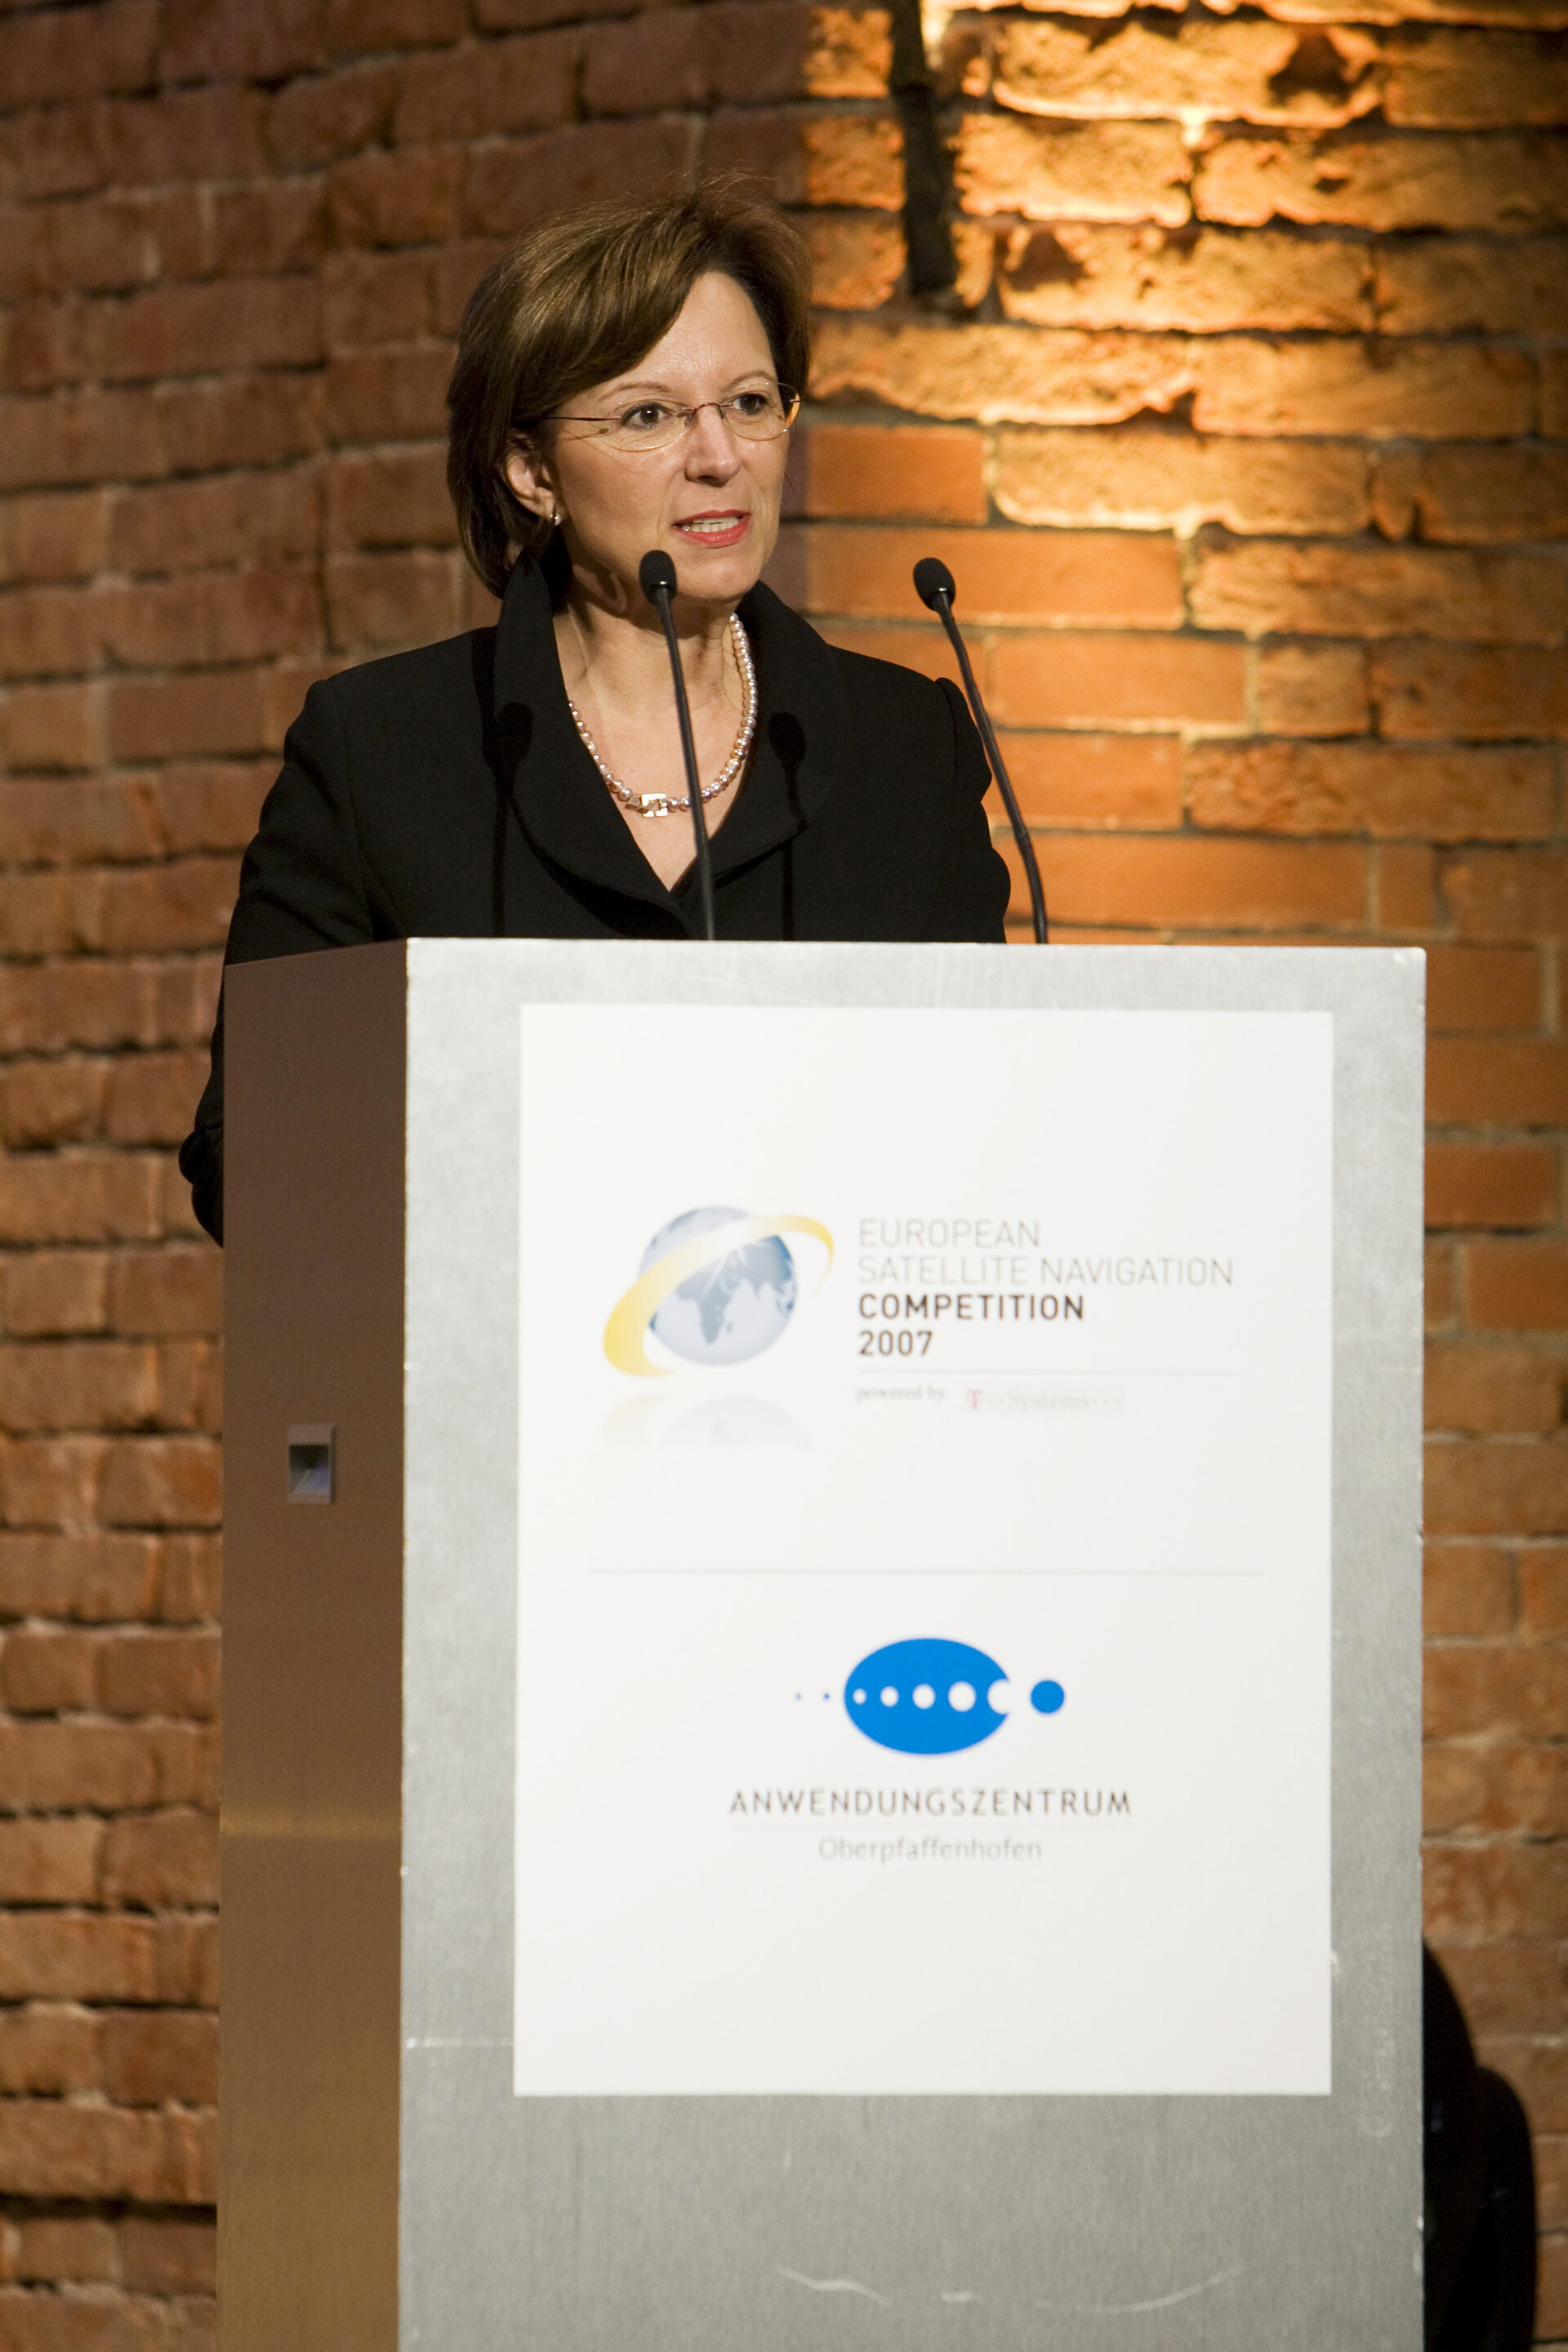 Emilia Müller, Bavarian State Minister for Economic Affairs, Infrastructure, Transport and Technology